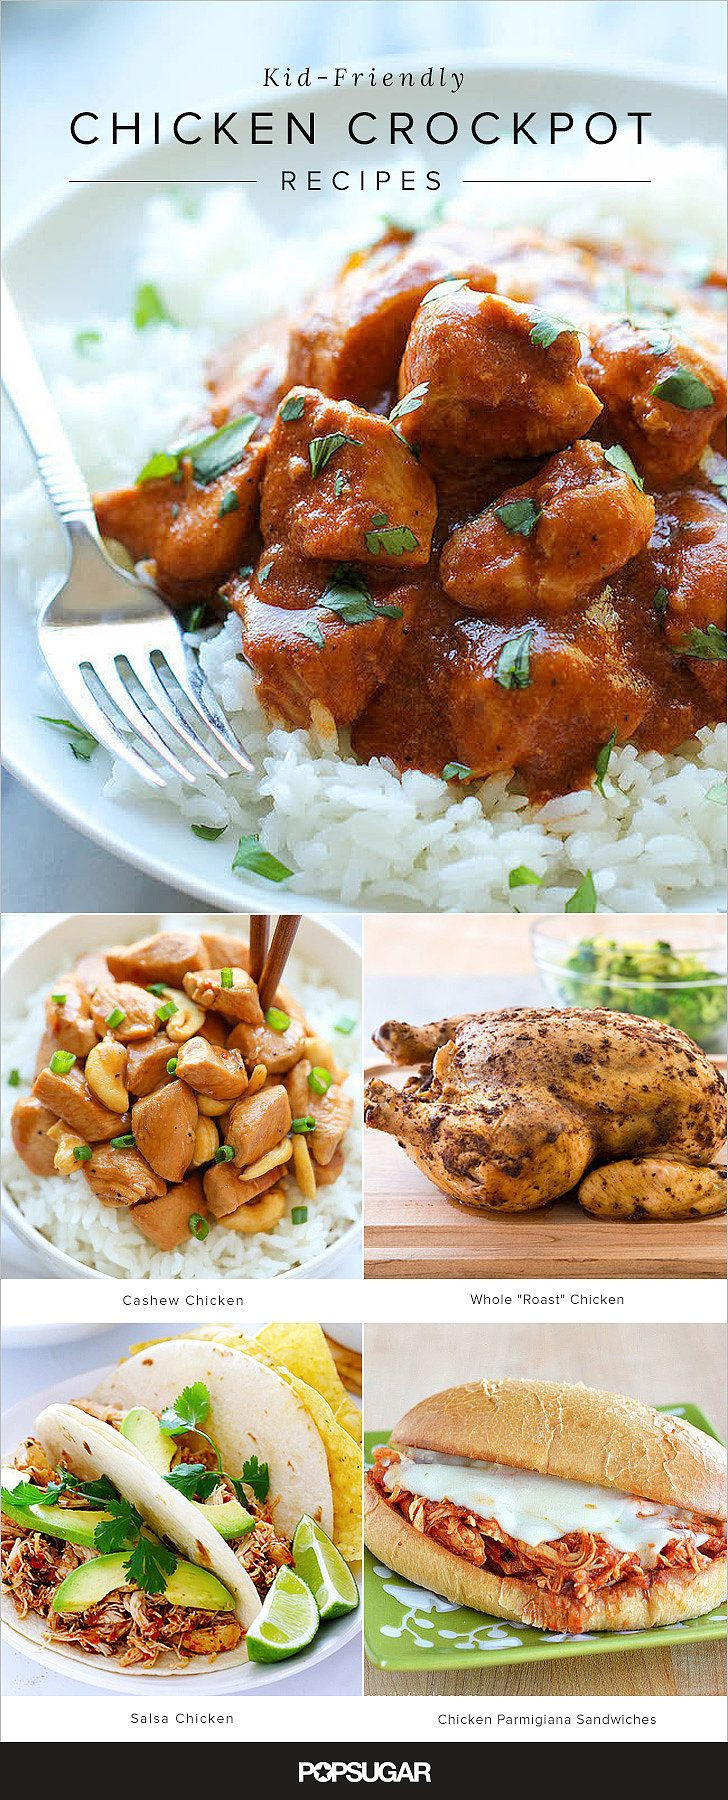 Healthy Kid Friendly Crock Pot Recipes
 19 Kid Friendly Chicken Recipes That You Can Make in the